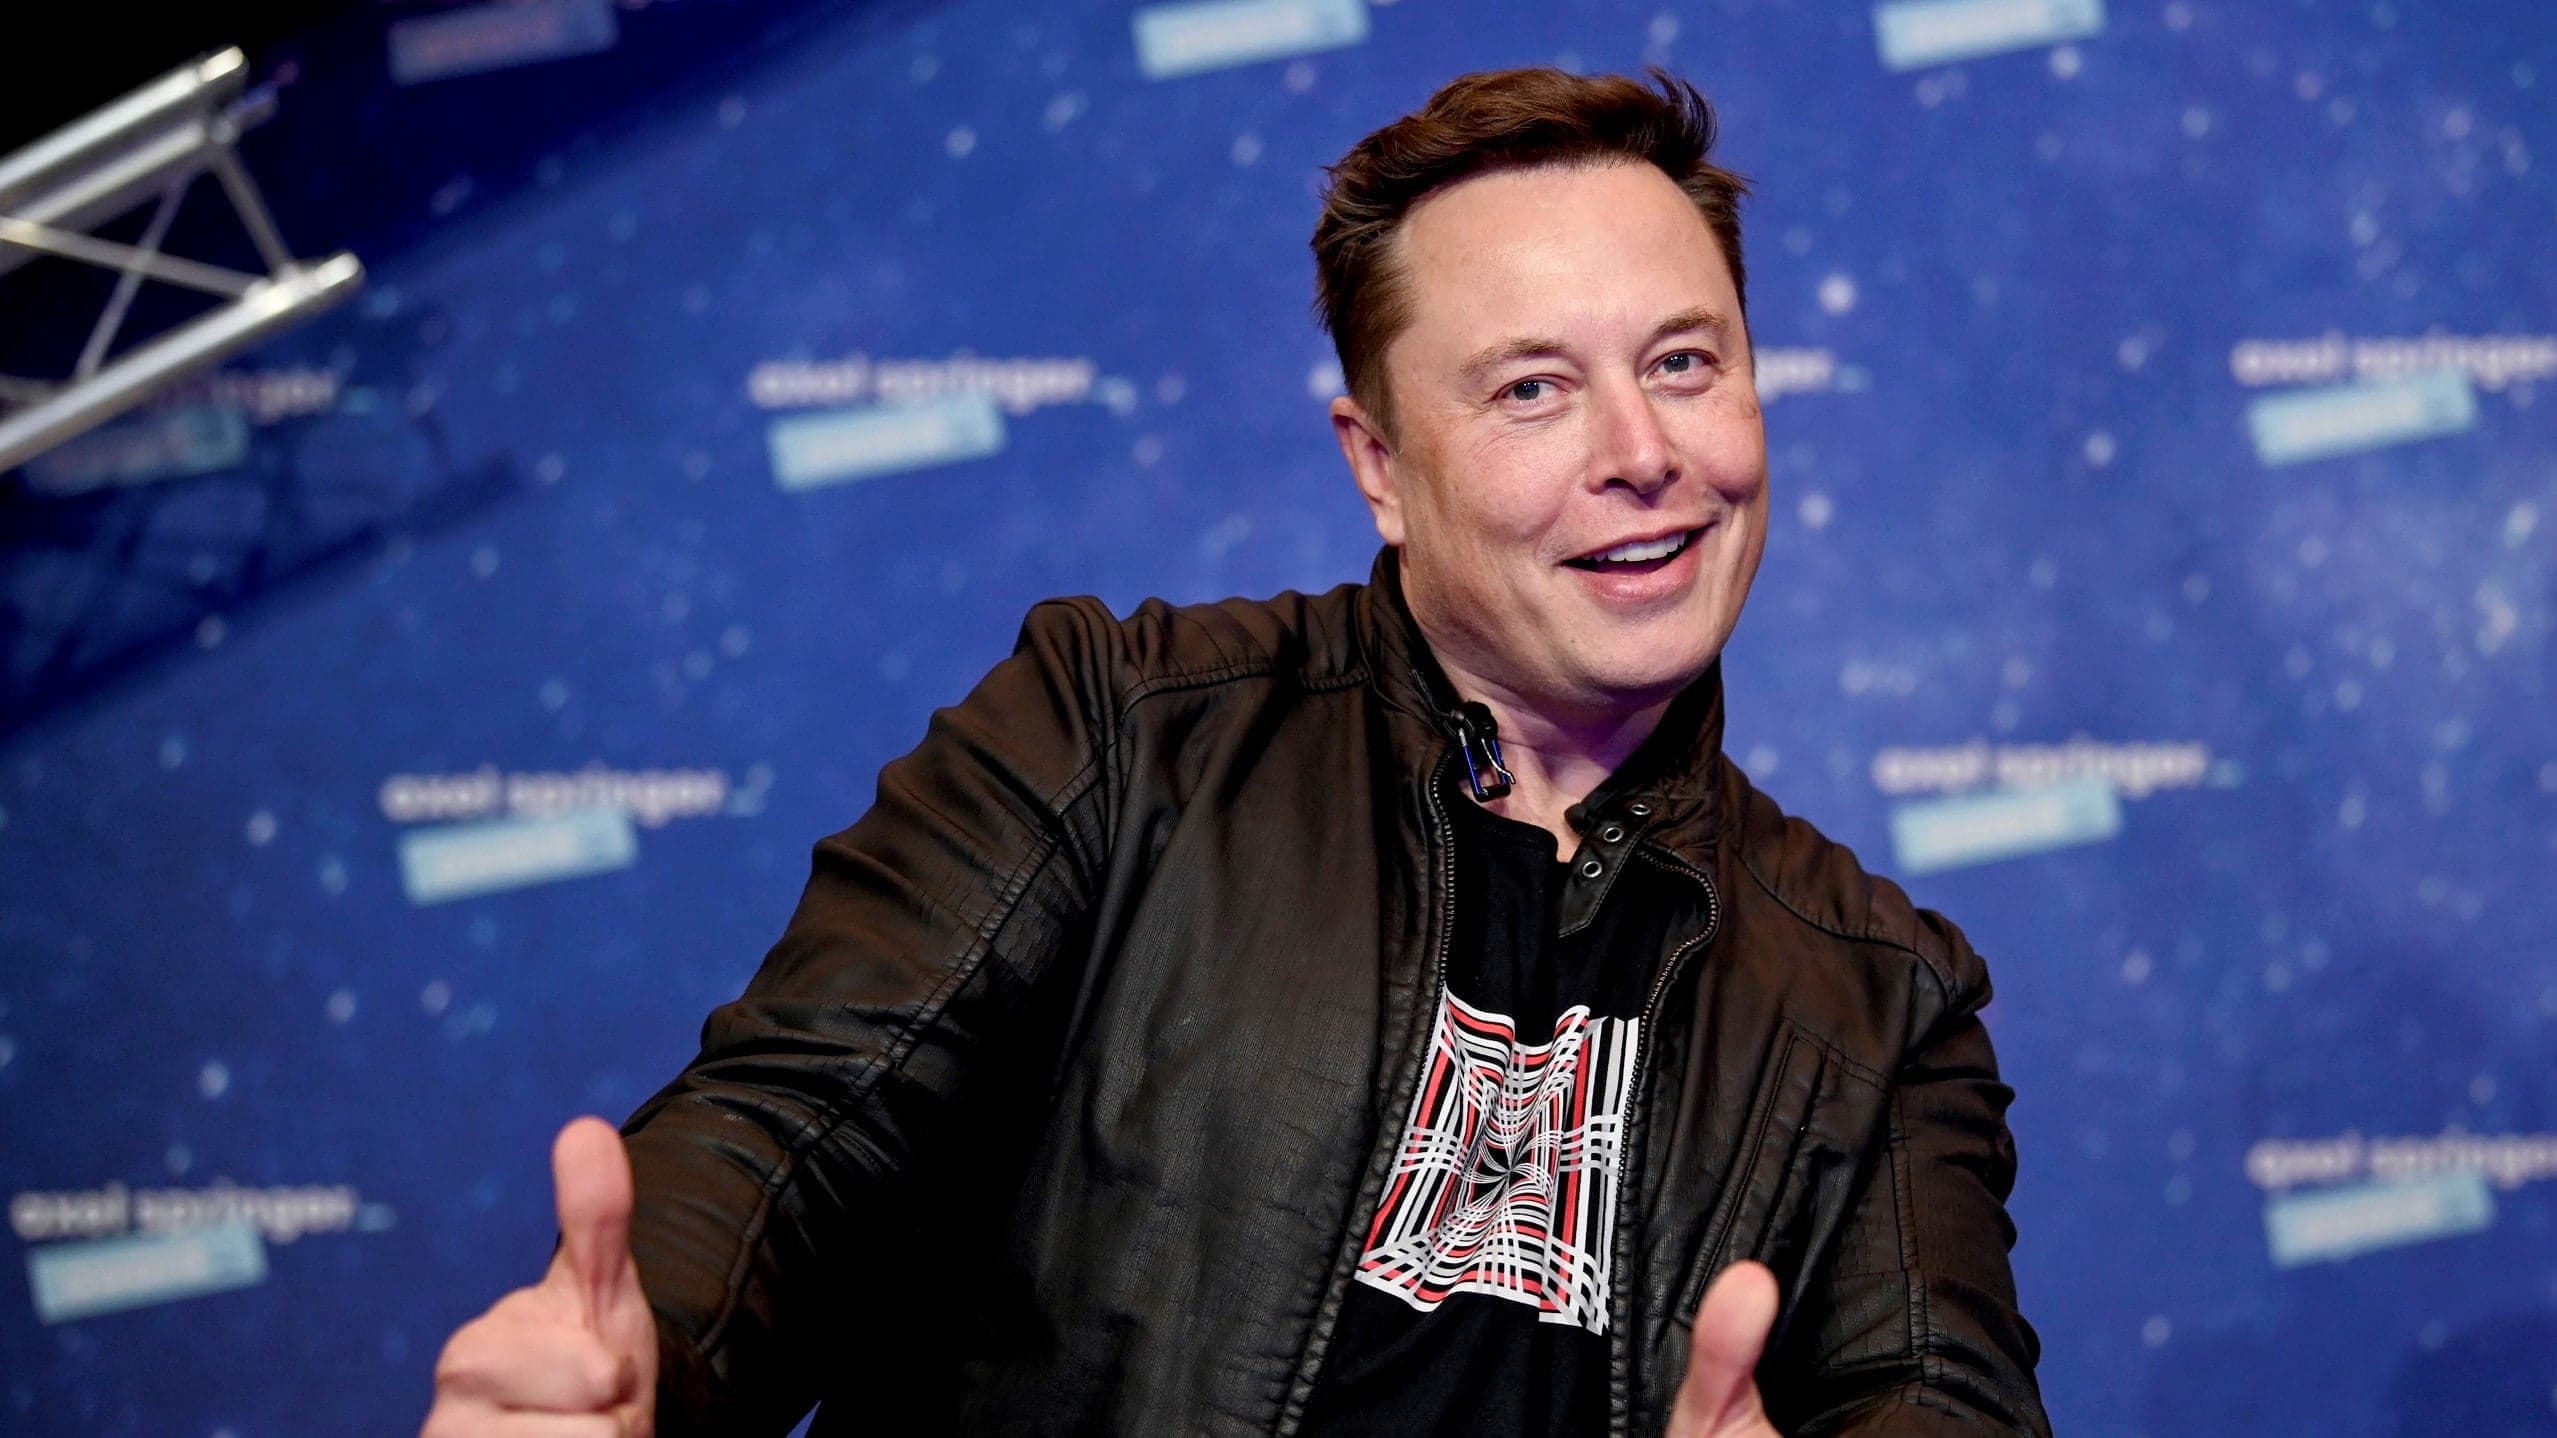 Elon Musk Is Now the Richest Person on Earth Thanks to Surging Tesla Stock